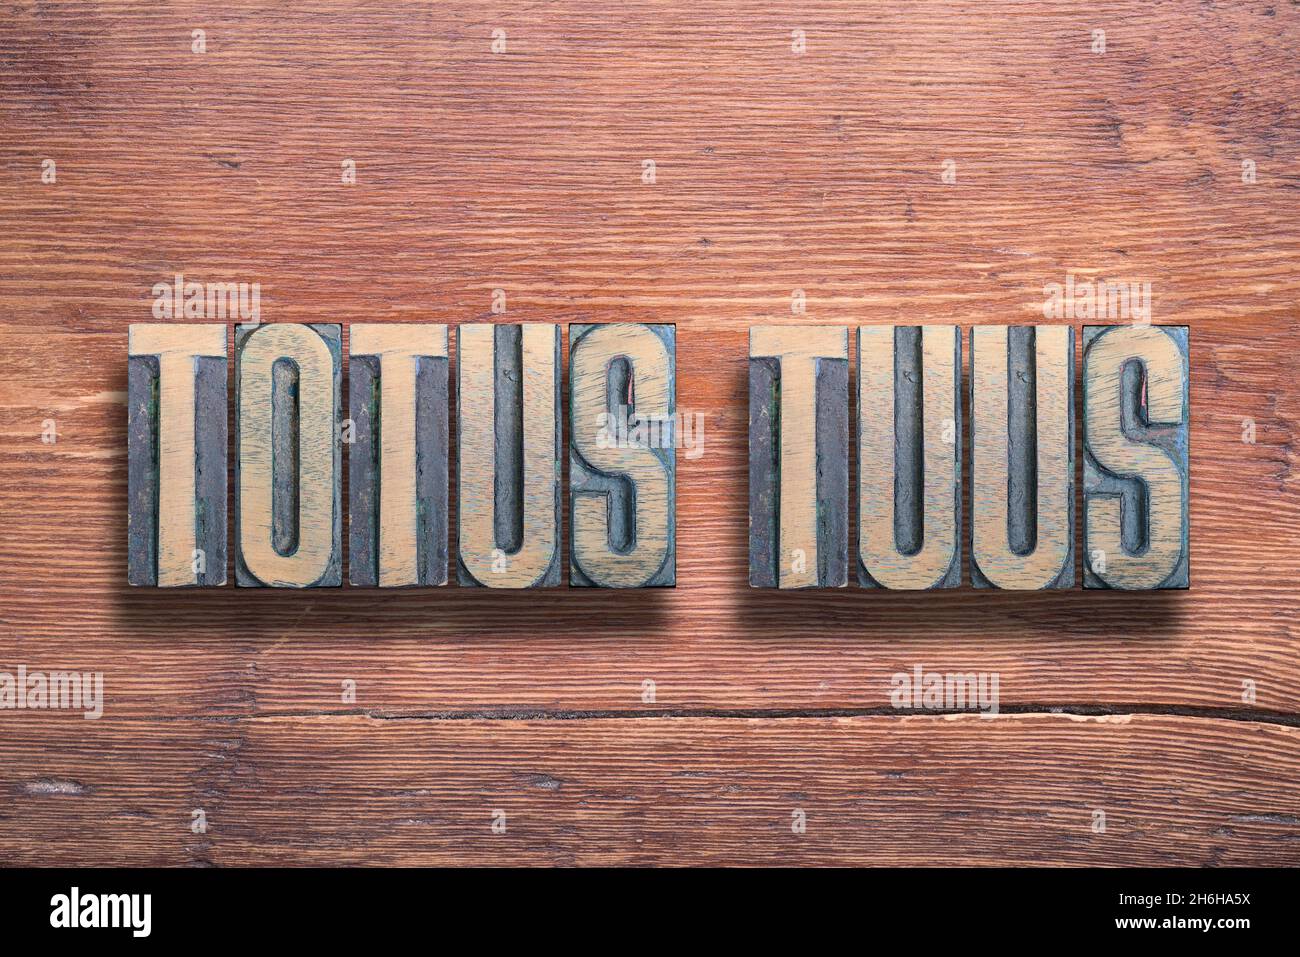 Totus Tuus ancient Latin saying meaning - Totally yours, combined on vintage varnished wooden surface Stock Photo